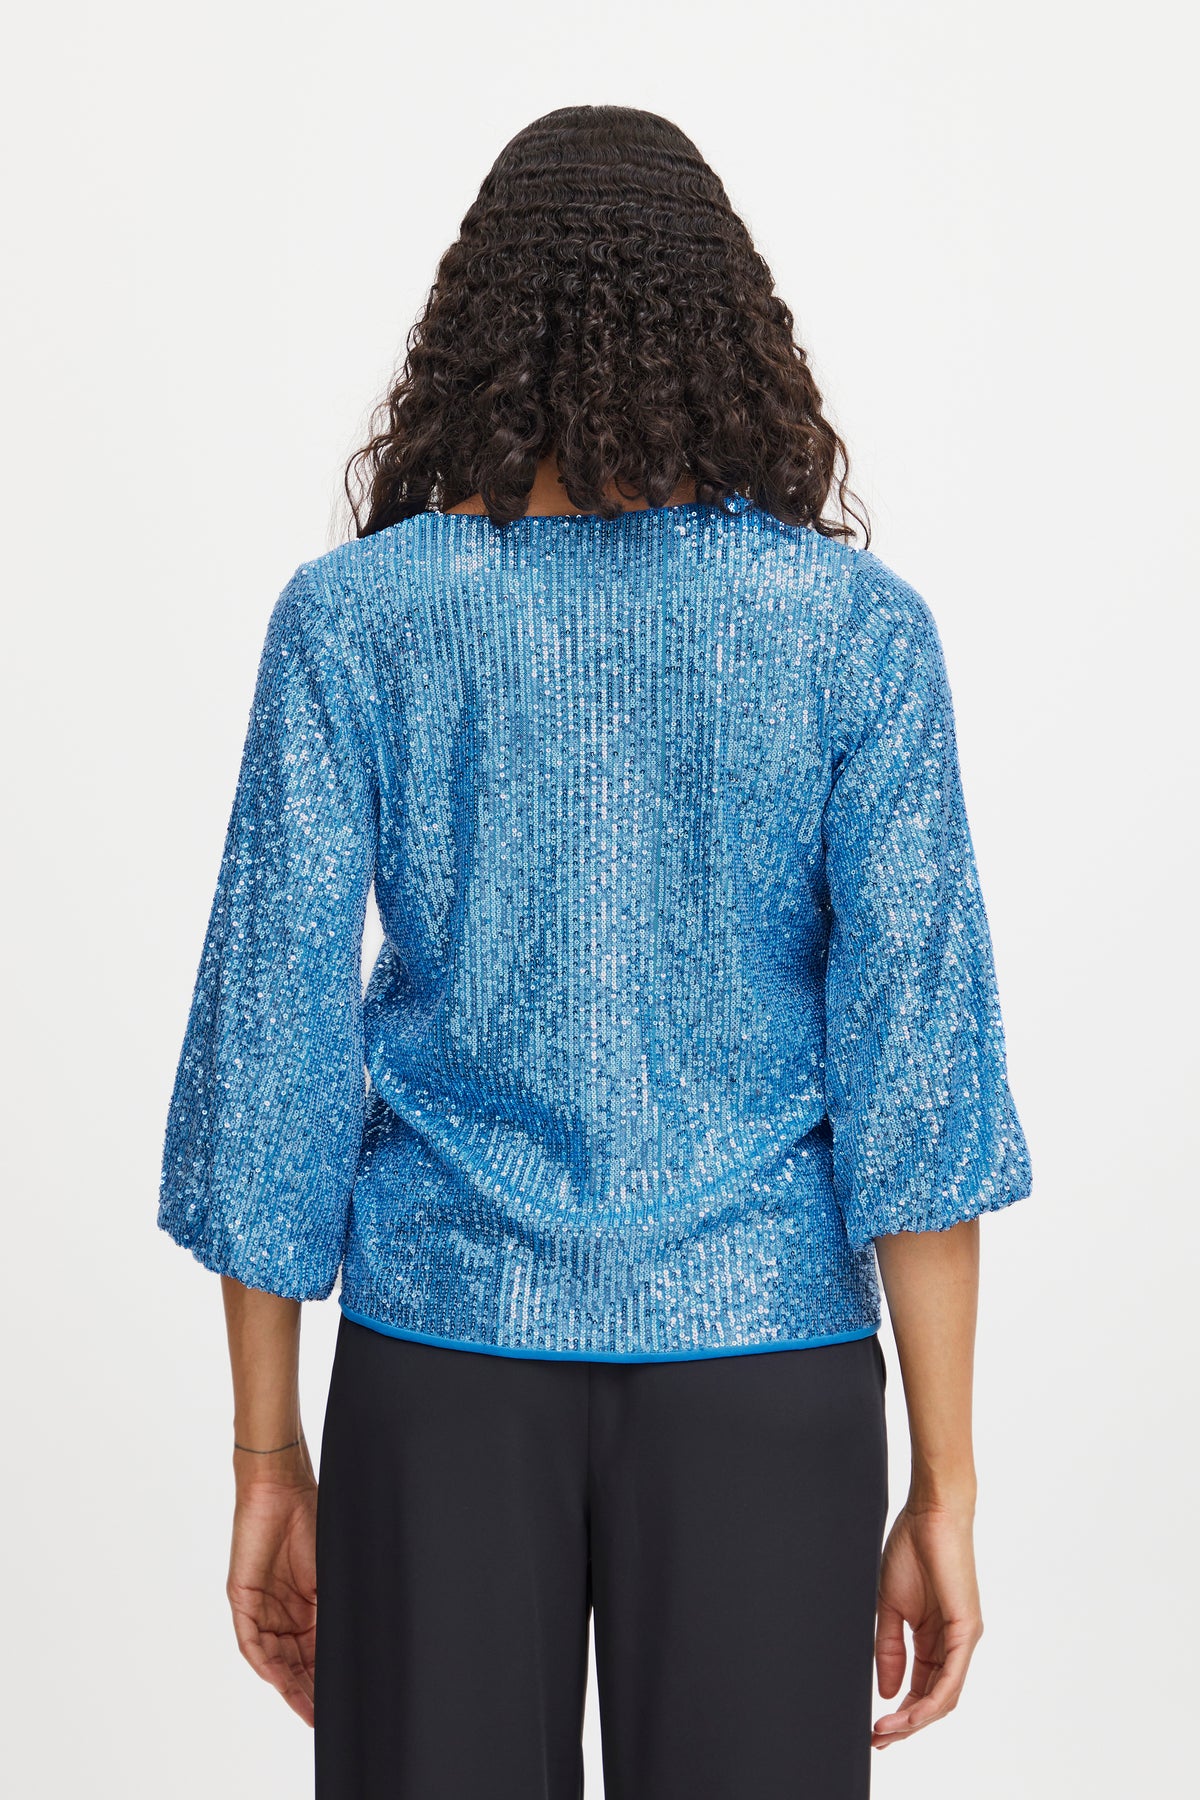 B.Young Bysolia Swedish Blue V-Neck Blouse